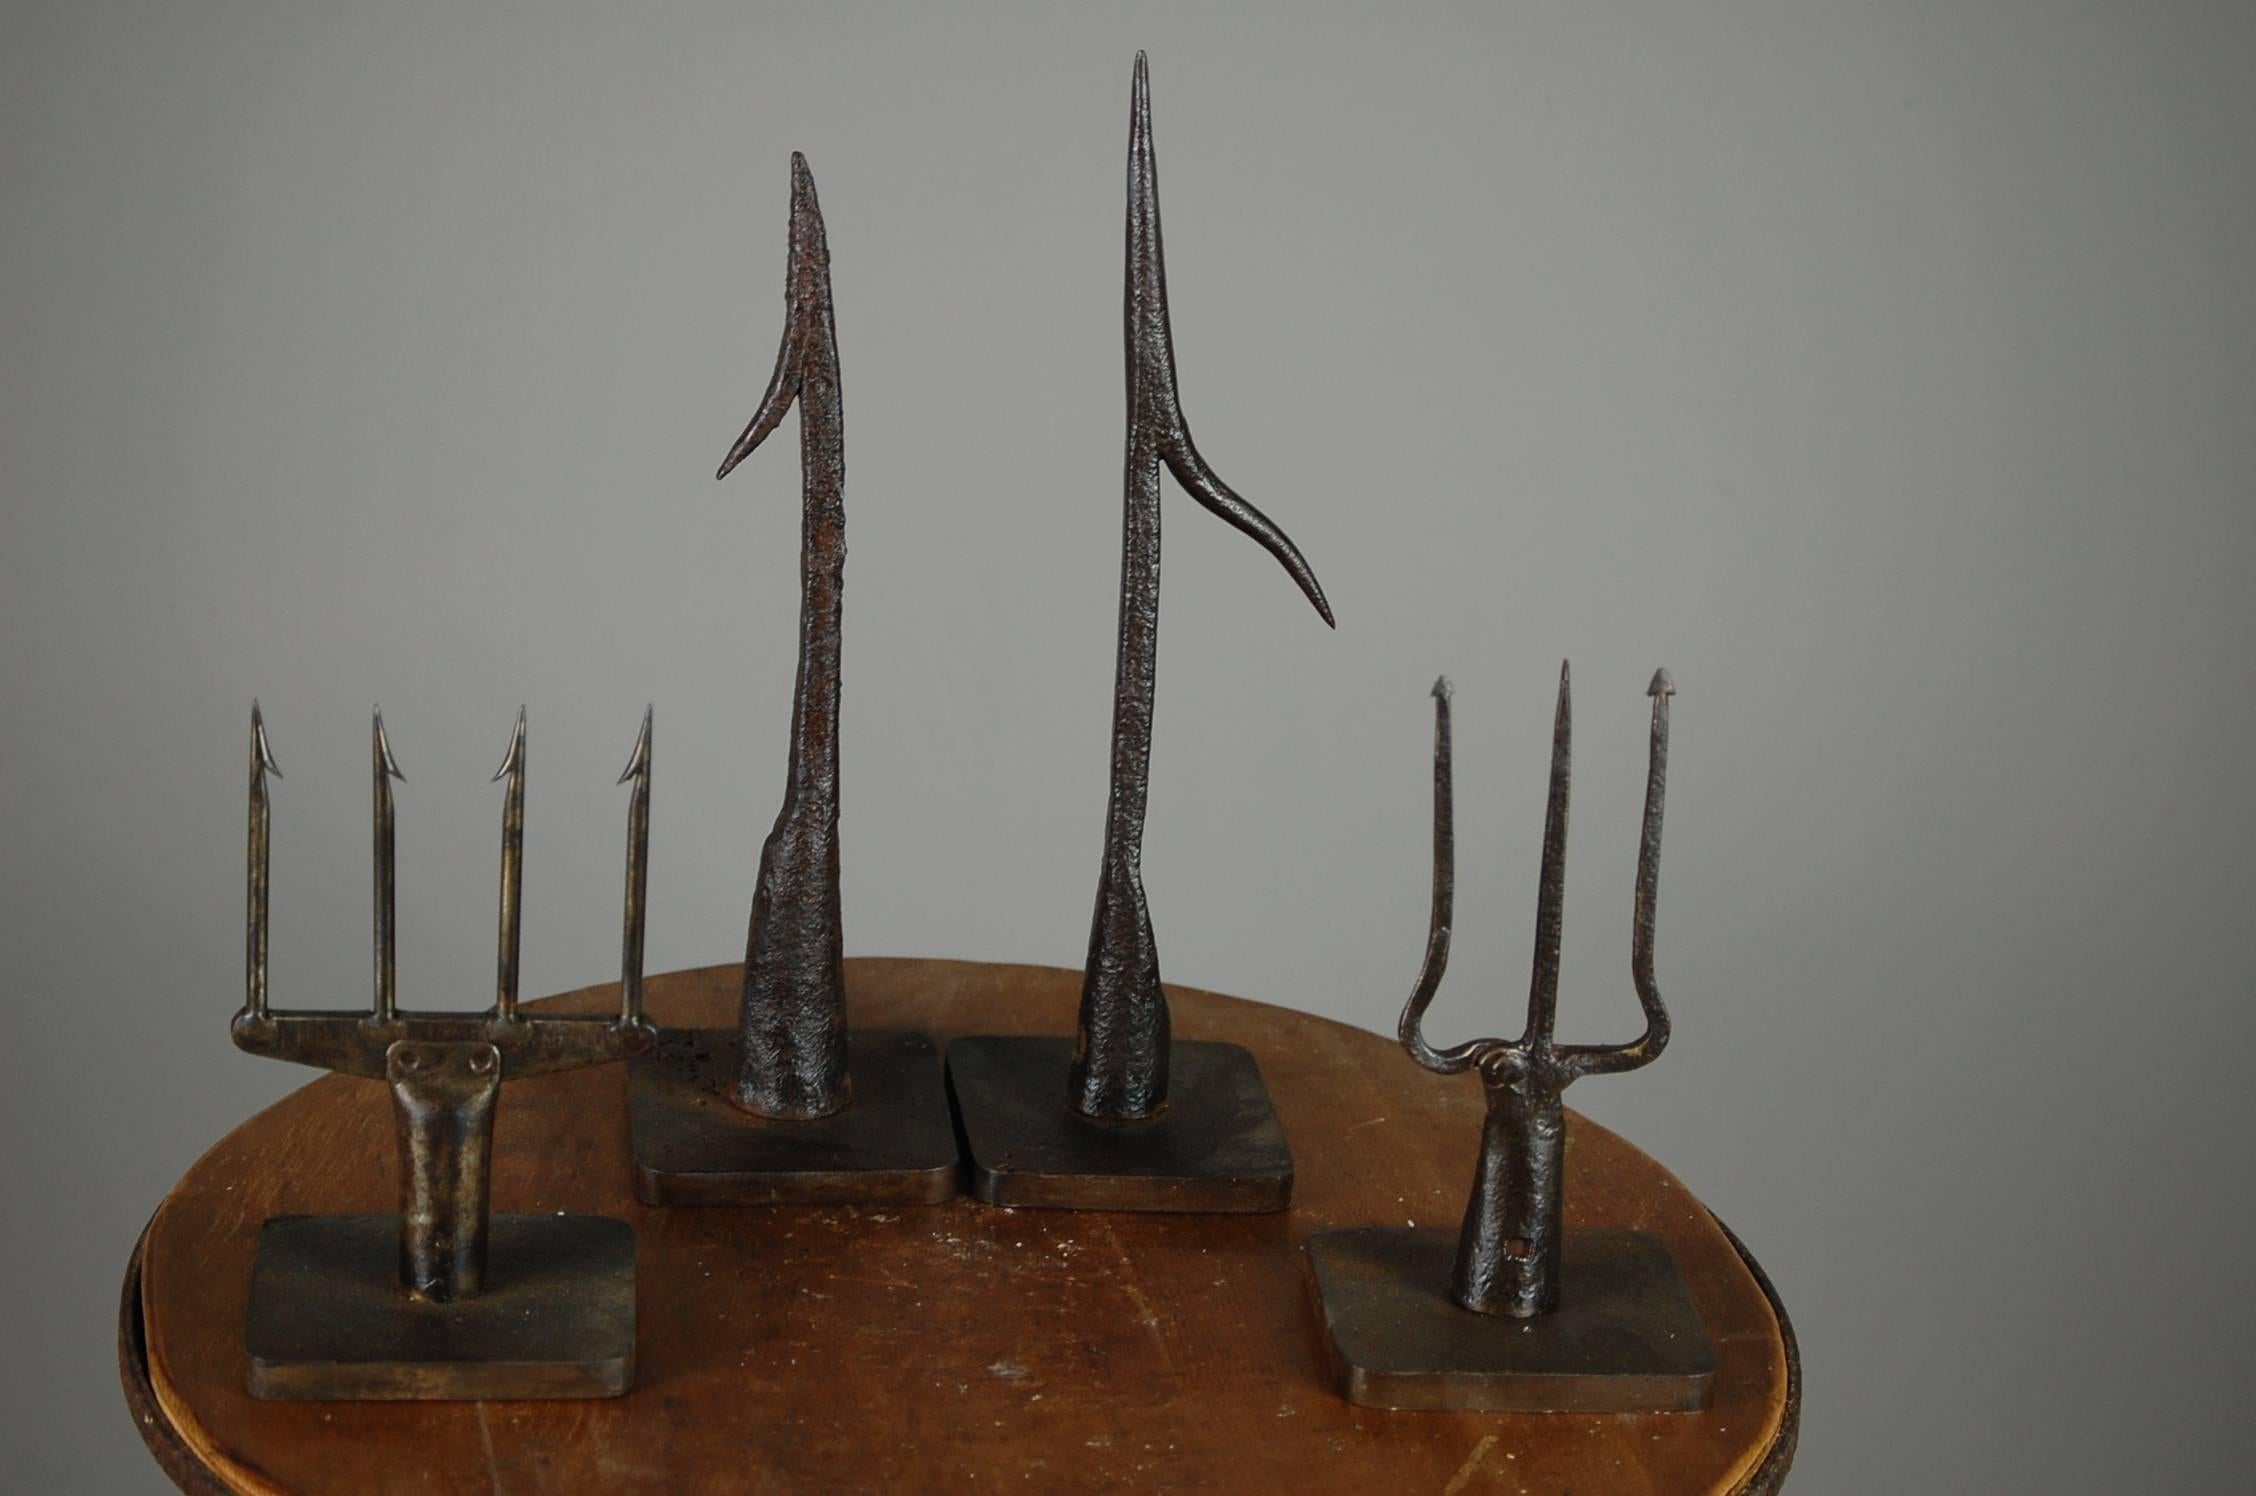 A collection of (4) Fine wrought iron fish spears, the trident being 18th century and the others two being 19th century. Burnished finish mounted on individual metal stands. Price is for the collection of four. English. Measurement is for largest